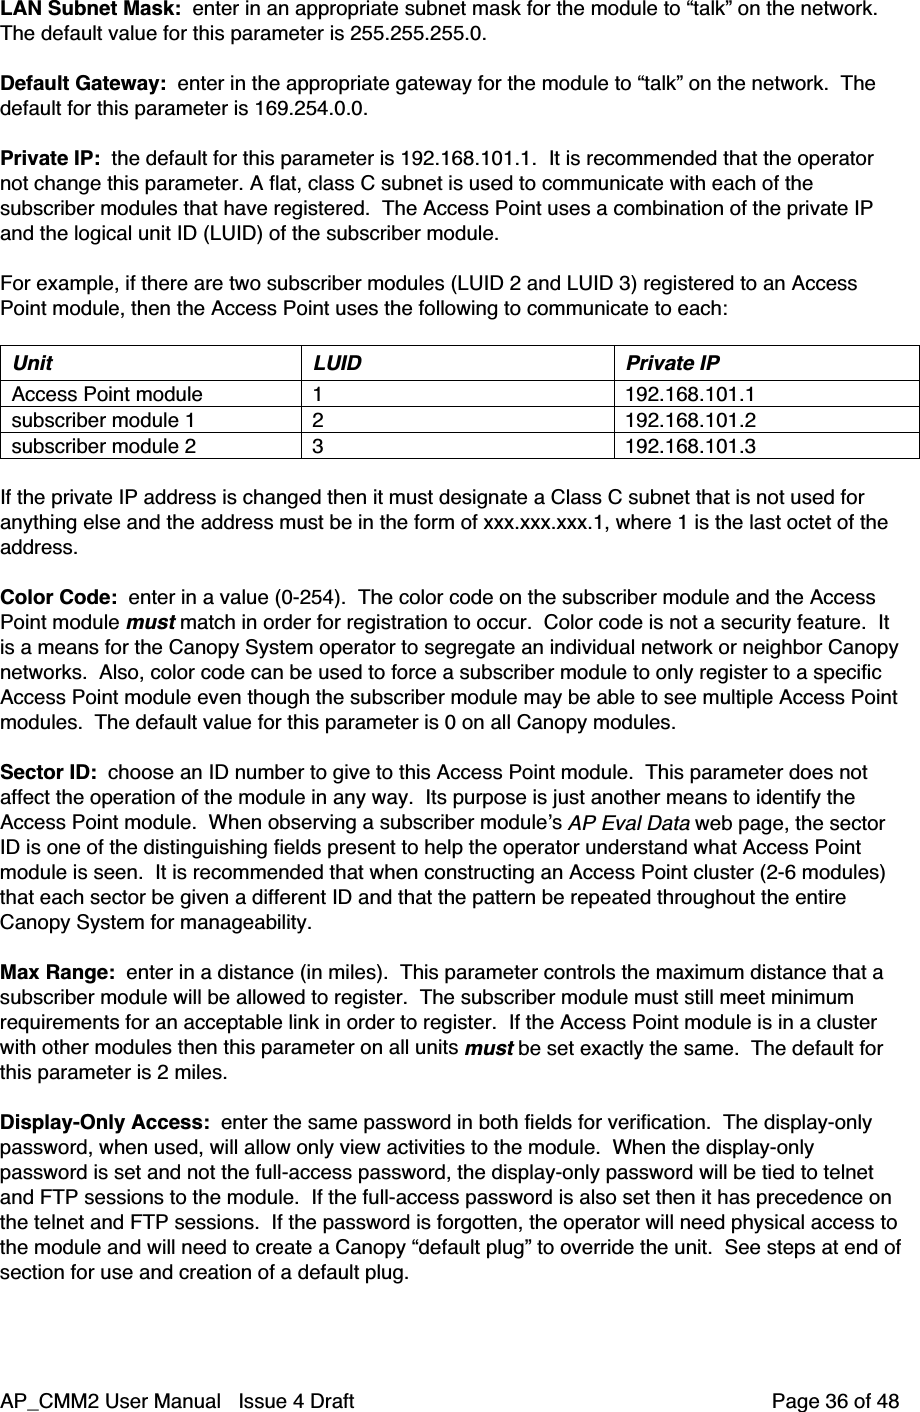 AP_CMM2 User Manual   Issue 4 Draft         Page 36 of 48LAN Subnet Mask:  enter in an appropriate subnet mask for the module to “talk” on the network.The default value for this parameter is 255.255.255.0.Default Gateway:  enter in the appropriate gateway for the module to “talk” on the network.  Thedefault for this parameter is 169.254.0.0.Private IP:  the default for this parameter is 192.168.101.1.  It is recommended that the operatornot change this parameter. A flat, class C subnet is used to communicate with each of thesubscriber modules that have registered.  The Access Point uses a combination of the private IPand the logical unit ID (LUID) of the subscriber module.For example, if there are two subscriber modules (LUID 2 and LUID 3) registered to an AccessPoint module, then the Access Point uses the following to communicate to each:Unit LUID Private IPAccess Point module 1 192.168.101.1subscriber module 1 2 192.168.101.2subscriber module 2 3 192.168.101.3If the private IP address is changed then it must designate a Class C subnet that is not used foranything else and the address must be in the form of xxx.xxx.xxx.1, where 1 is the last octet of theaddress.Color Code:  enter in a value (0-254).  The color code on the subscriber module and the AccessPoint module must match in order for registration to occur.  Color code is not a security feature.  Itis a means for the Canopy System operator to segregate an individual network or neighbor Canopynetworks.  Also, color code can be used to force a subscriber module to only register to a specificAccess Point module even though the subscriber module may be able to see multiple Access Pointmodules.  The default value for this parameter is 0 on all Canopy modules.Sector ID:  choose an ID number to give to this Access Point module.  This parameter does notaffect the operation of the module in any way.  Its purpose is just another means to identify theAccess Point module.  When observing a subscriber module’s AP Eval Data web page, the sectorID is one of the distinguishing fields present to help the operator understand what Access Pointmodule is seen.  It is recommended that when constructing an Access Point cluster (2-6 modules)that each sector be given a different ID and that the pattern be repeated throughout the entireCanopy System for manageability.Max Range:  enter in a distance (in miles).  This parameter controls the maximum distance that asubscriber module will be allowed to register.  The subscriber module must still meet minimumrequirements for an acceptable link in order to register.  If the Access Point module is in a clusterwith other modules then this parameter on all units must be set exactly the same.  The default forthis parameter is 2 miles.Display-Only Access:  enter the same password in both fields for verification.  The display-onlypassword, when used, will allow only view activities to the module.  When the display-onlypassword is set and not the full-access password, the display-only password will be tied to telnetand FTP sessions to the module.  If the full-access password is also set then it has precedence onthe telnet and FTP sessions.  If the password is forgotten, the operator will need physical access tothe module and will need to create a Canopy “default plug” to override the unit.  See steps at end ofsection for use and creation of a default plug.